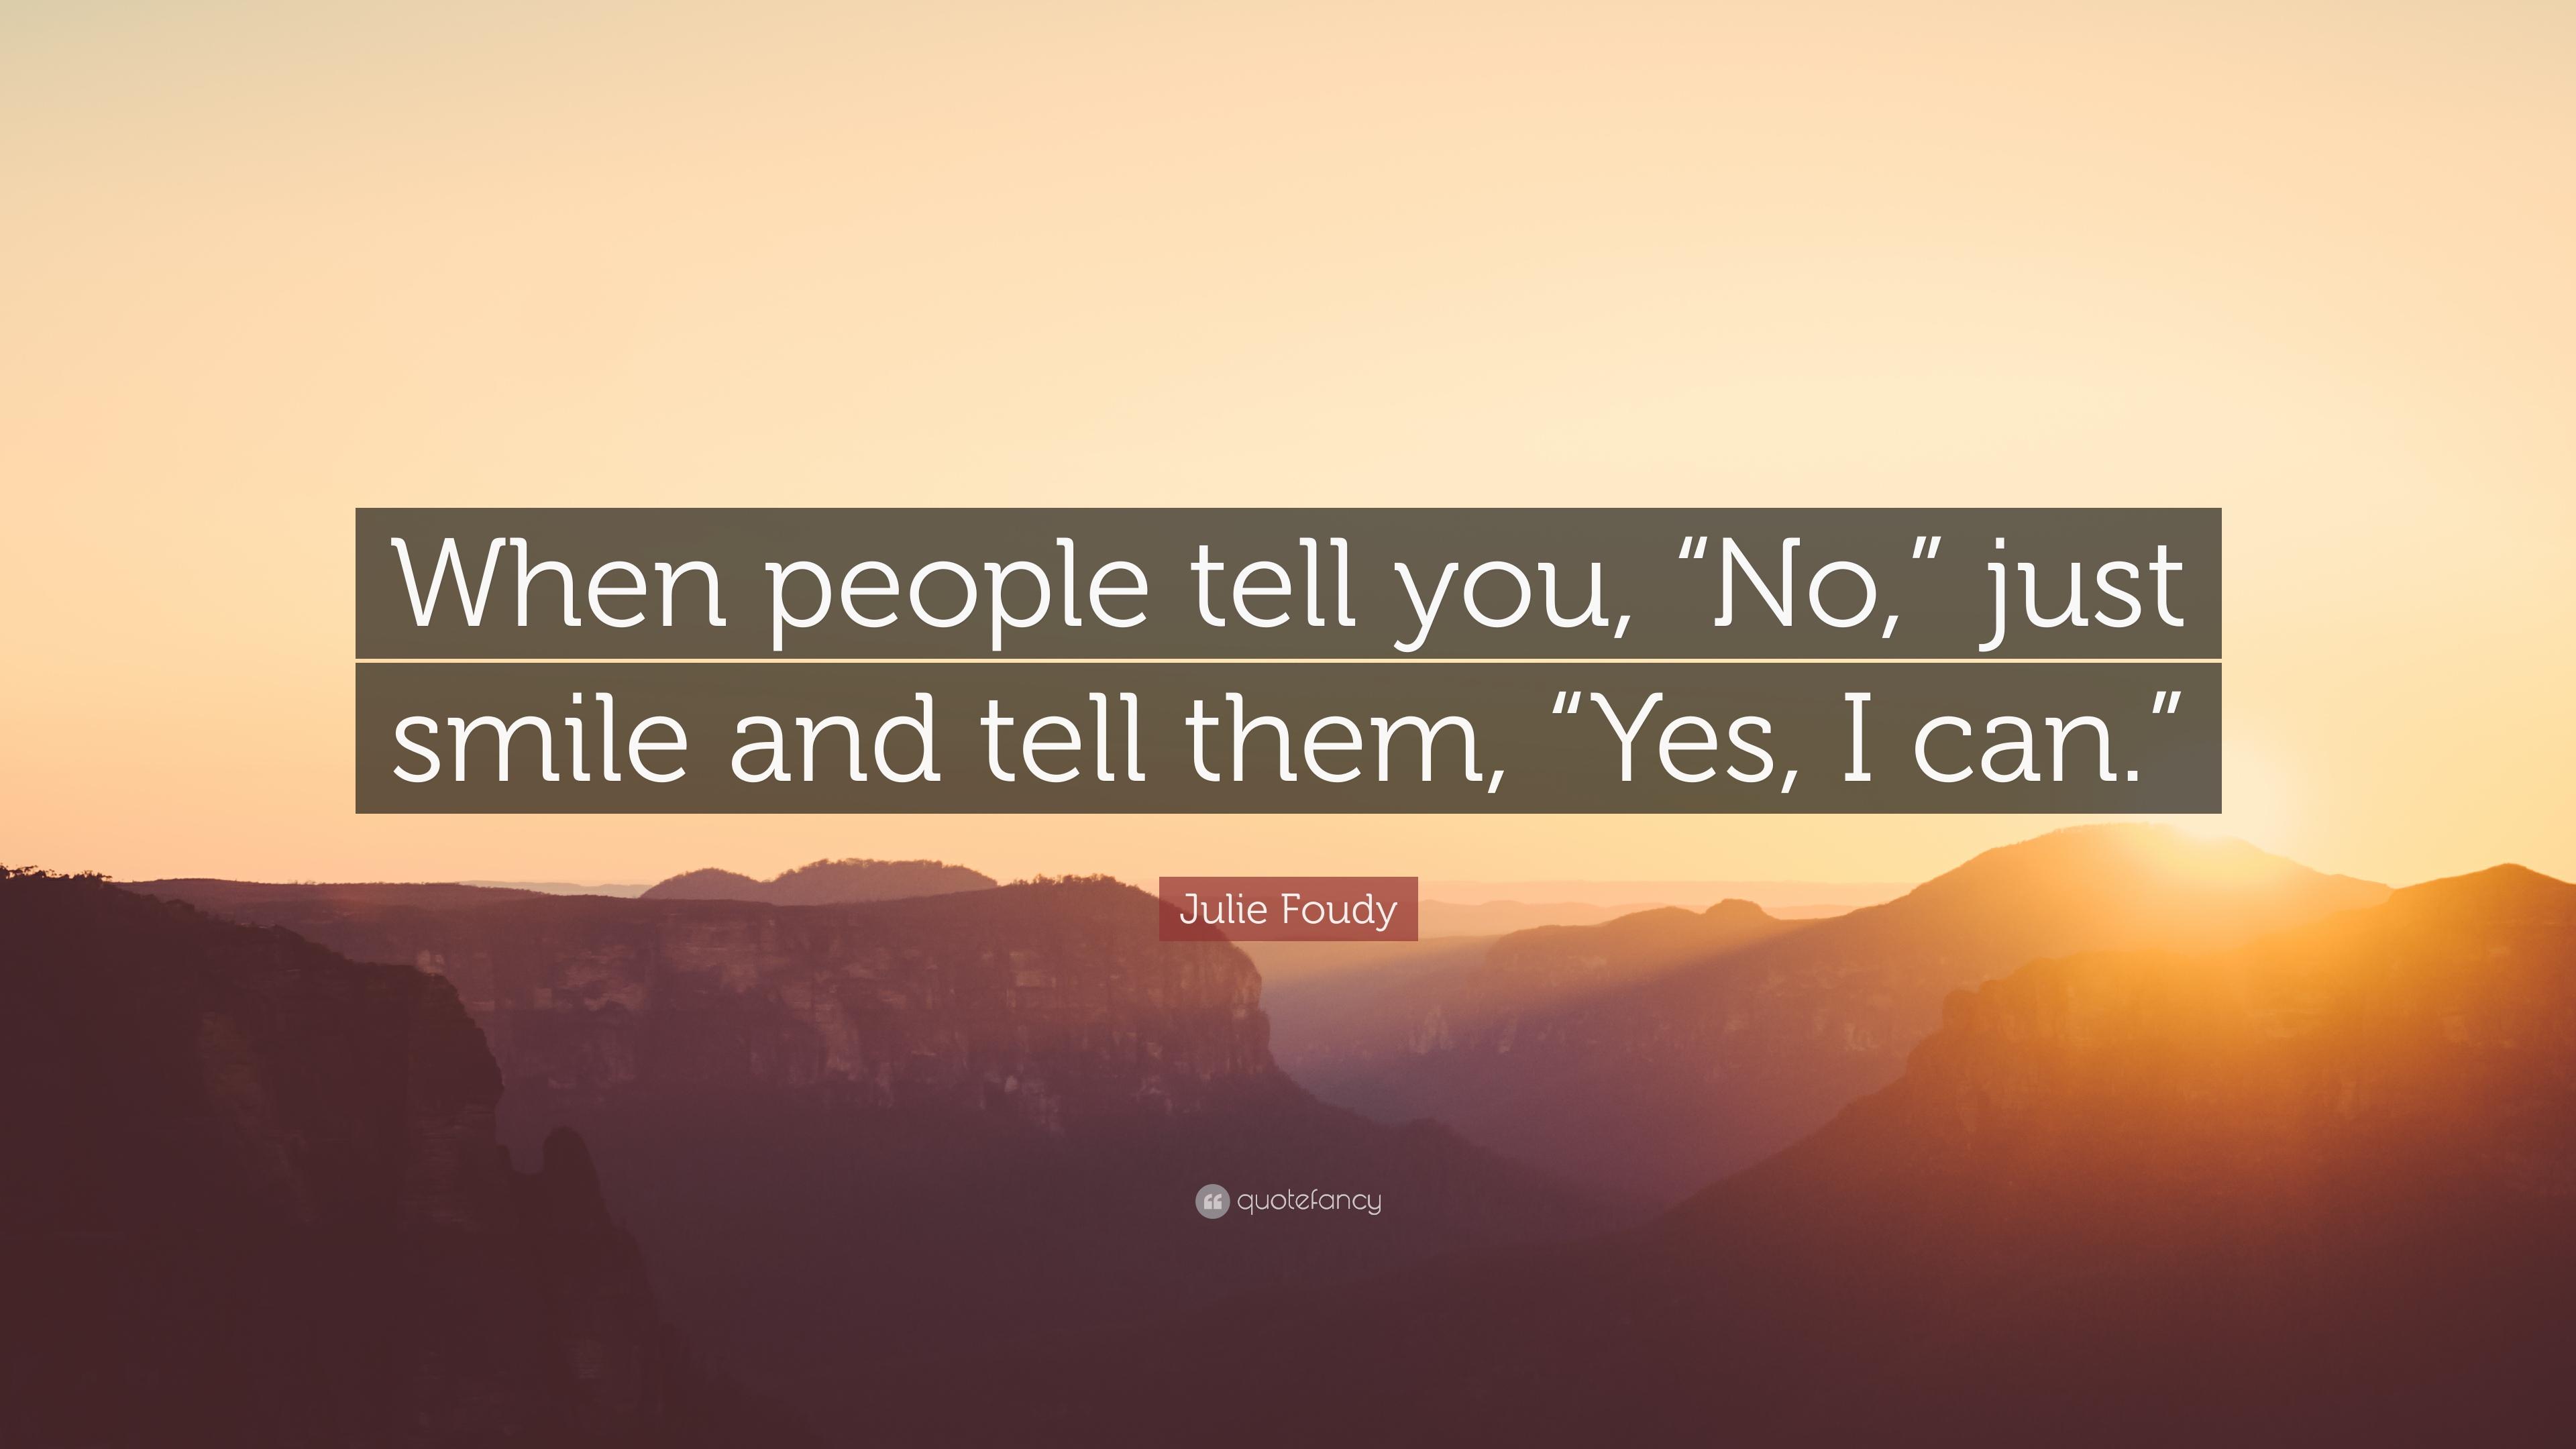 Julie Foudy Quote: “When people tell you, “No, ” just smile and tell